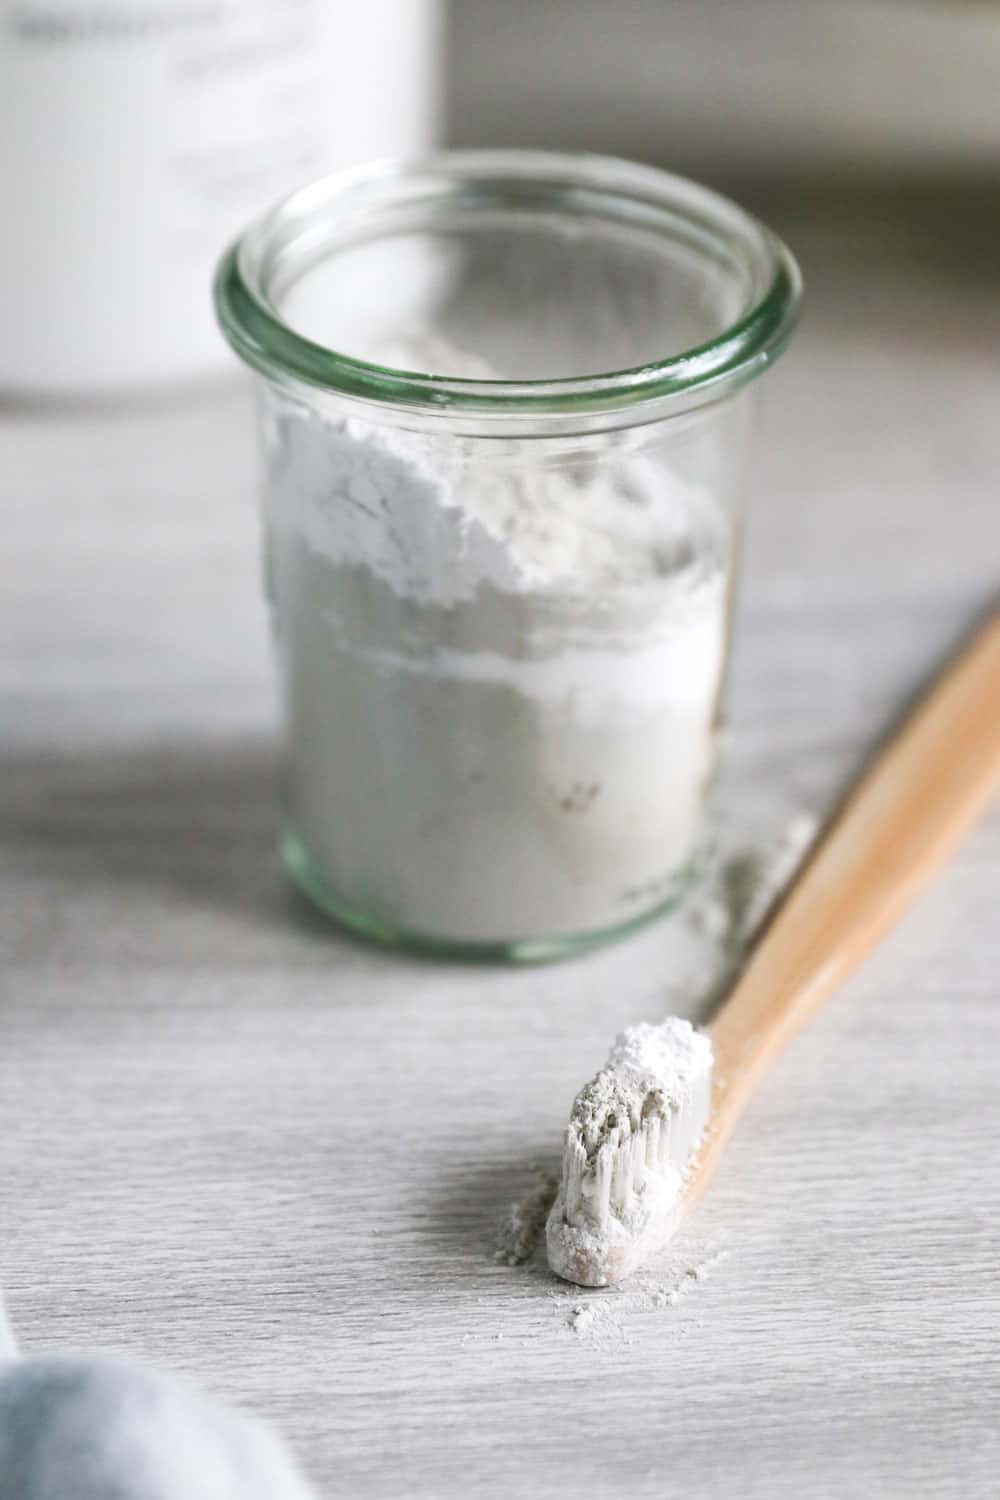 Whitening Tooth Powder with Bentonite Clay